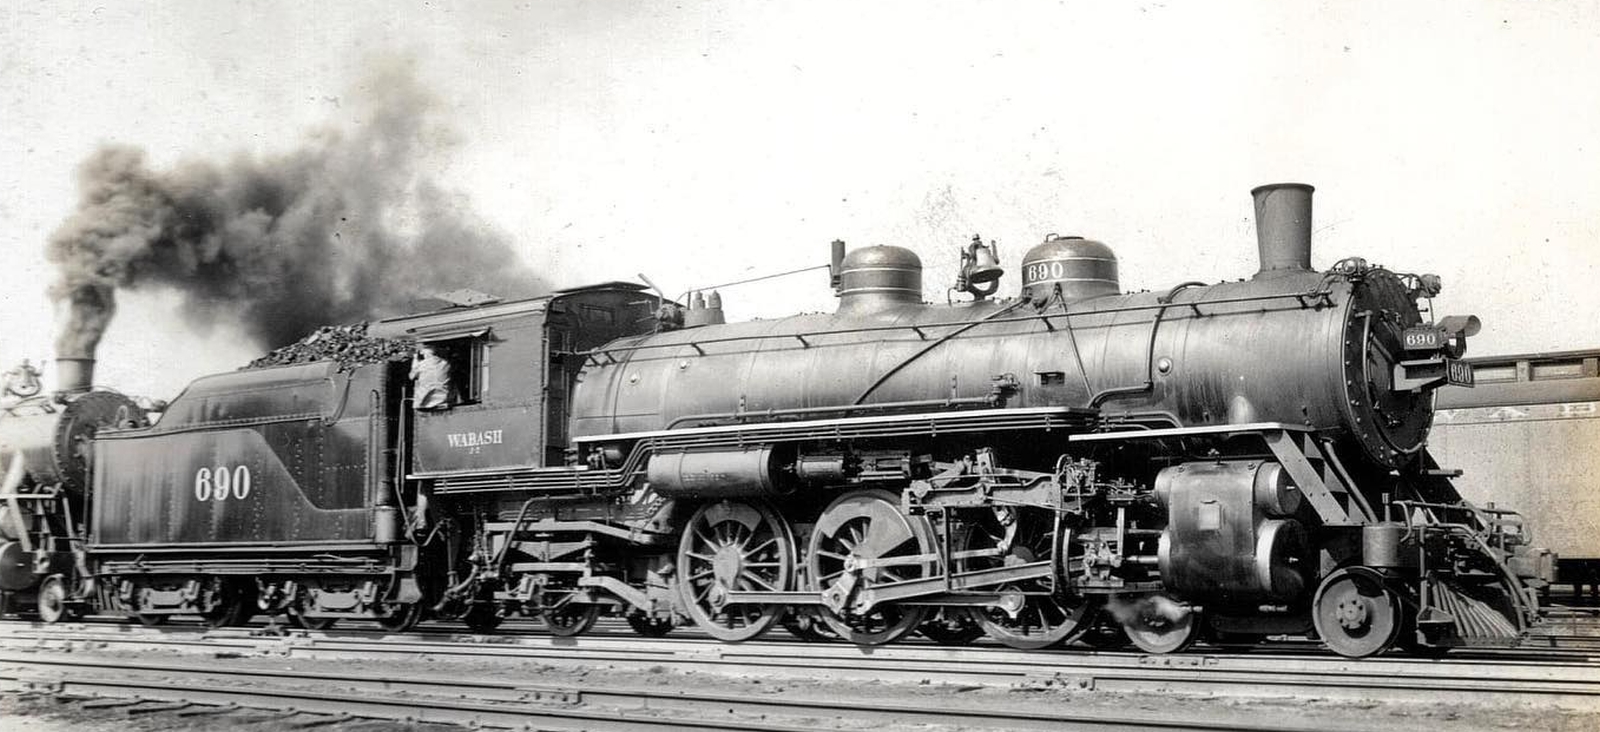 No. 690 in October 1936 double-headed in front of another locomotive